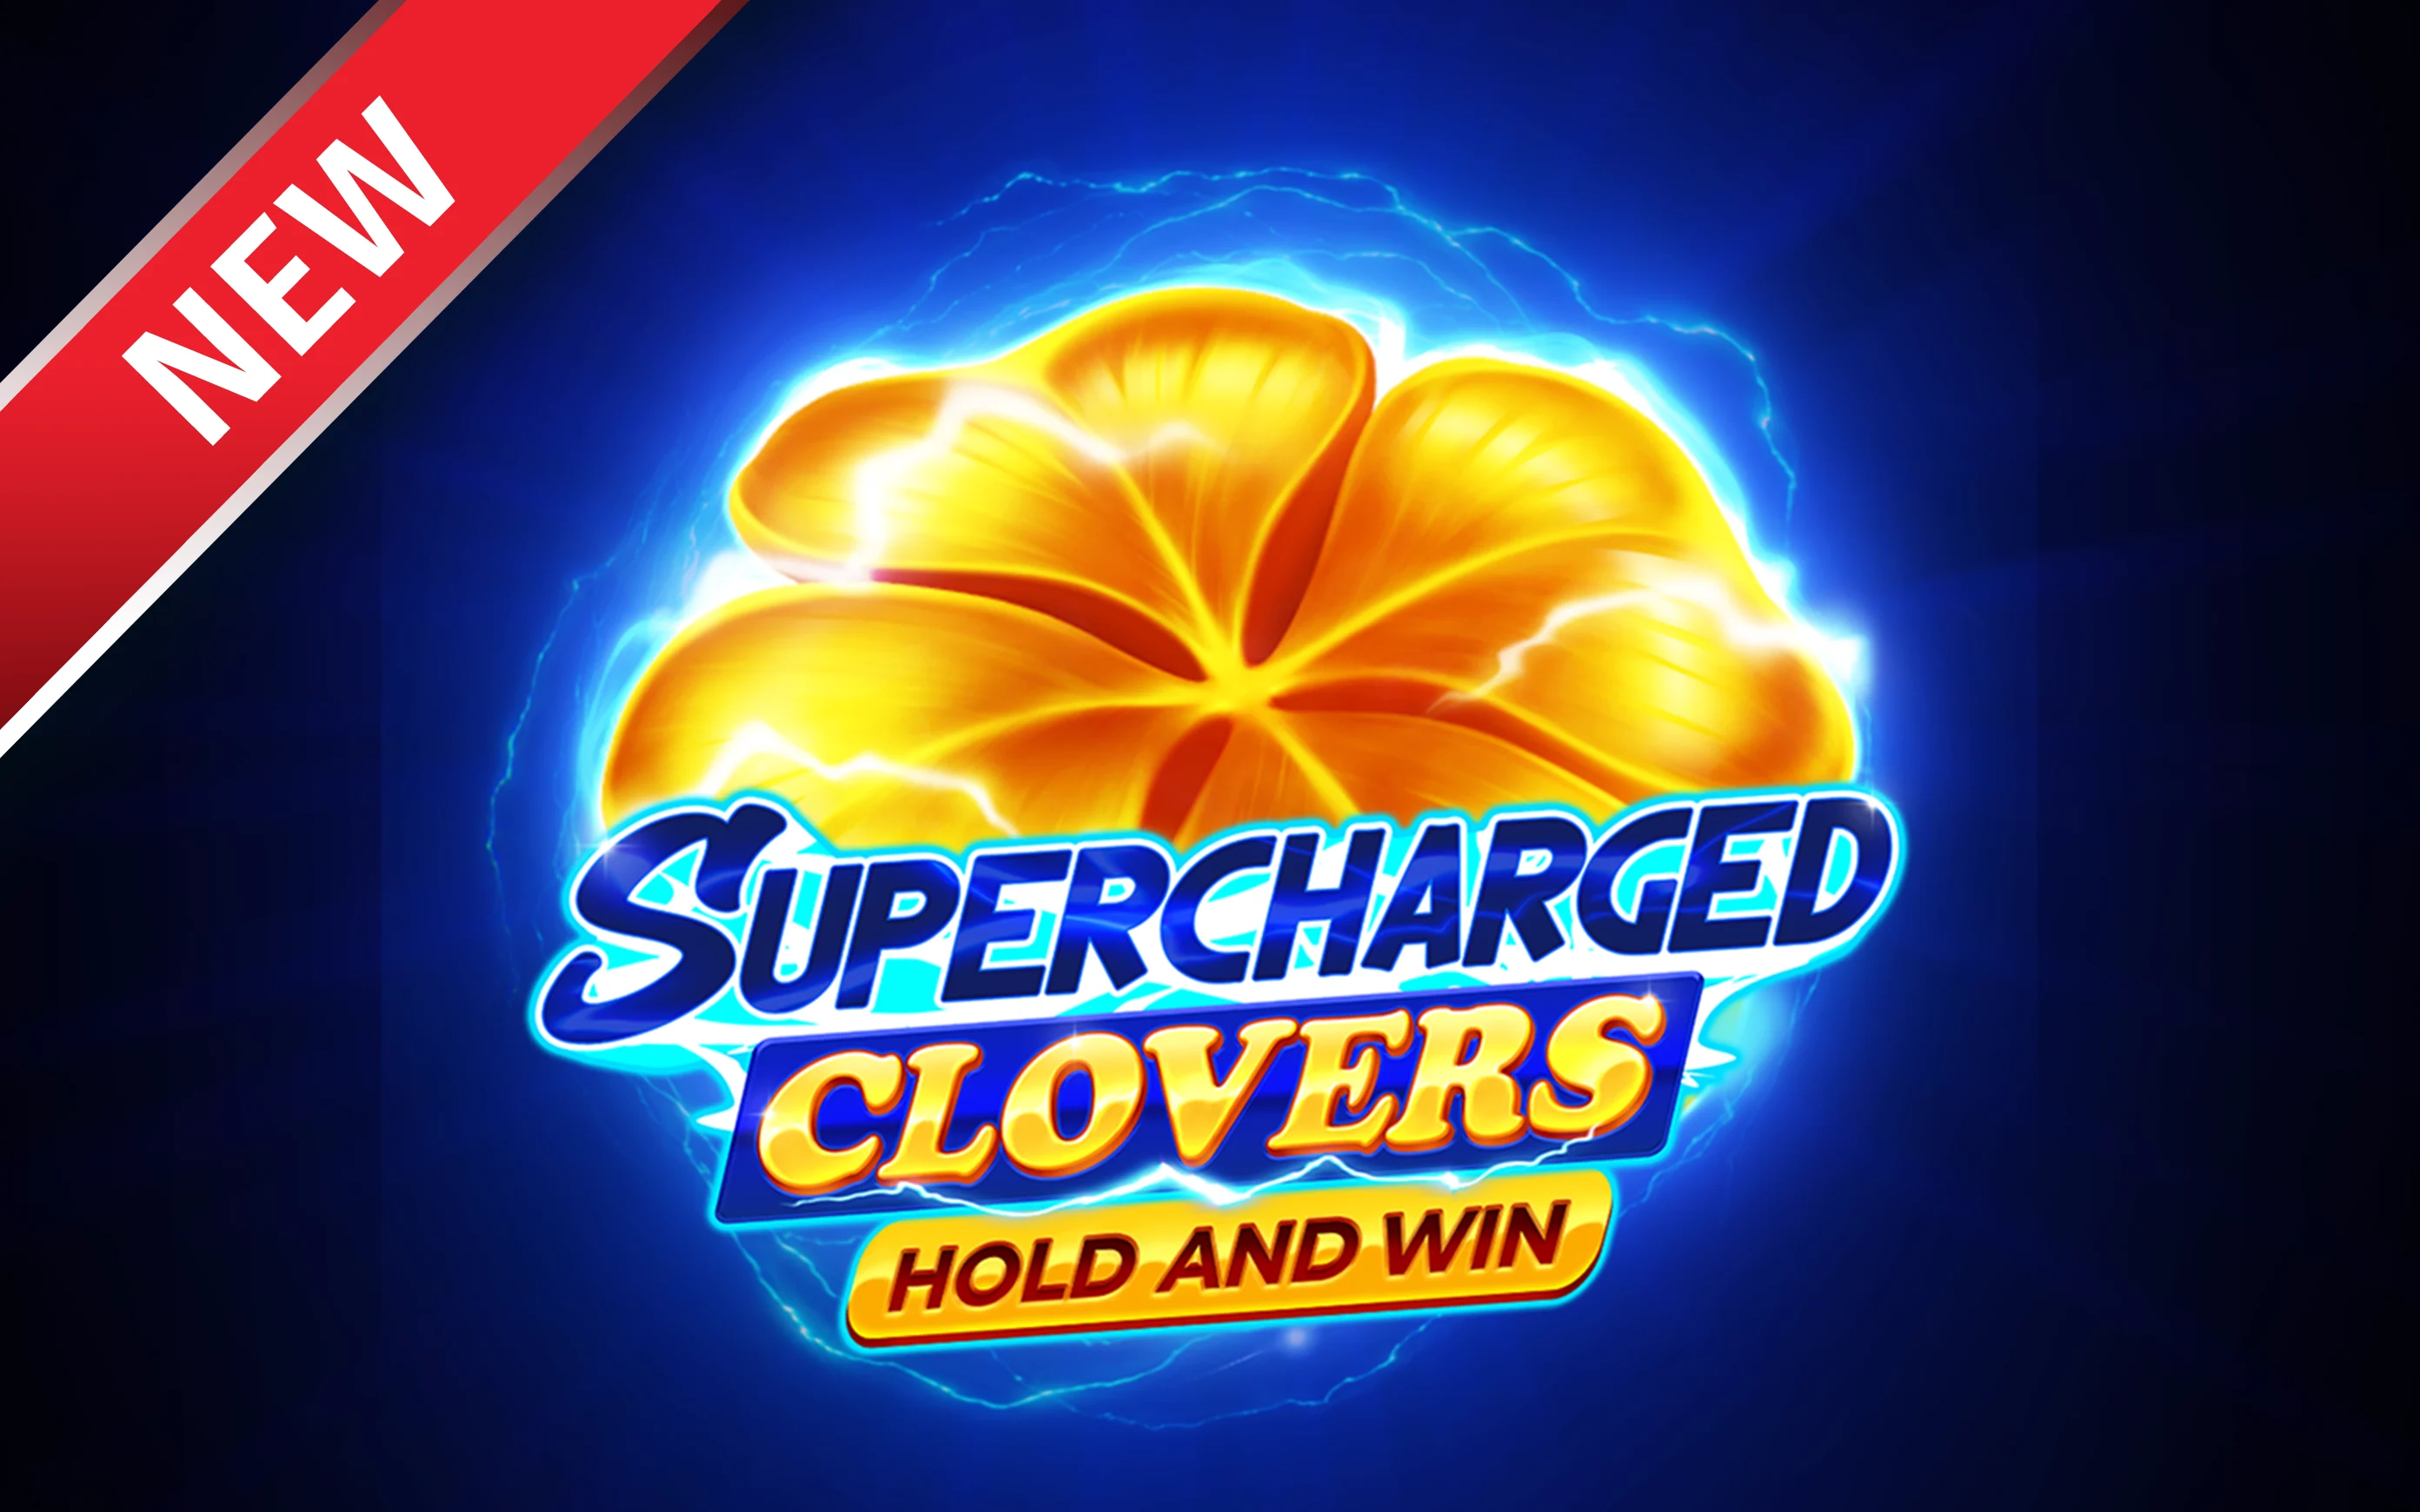 Play Supercharged Clovers: Hold and Win on Starcasino.be online casino